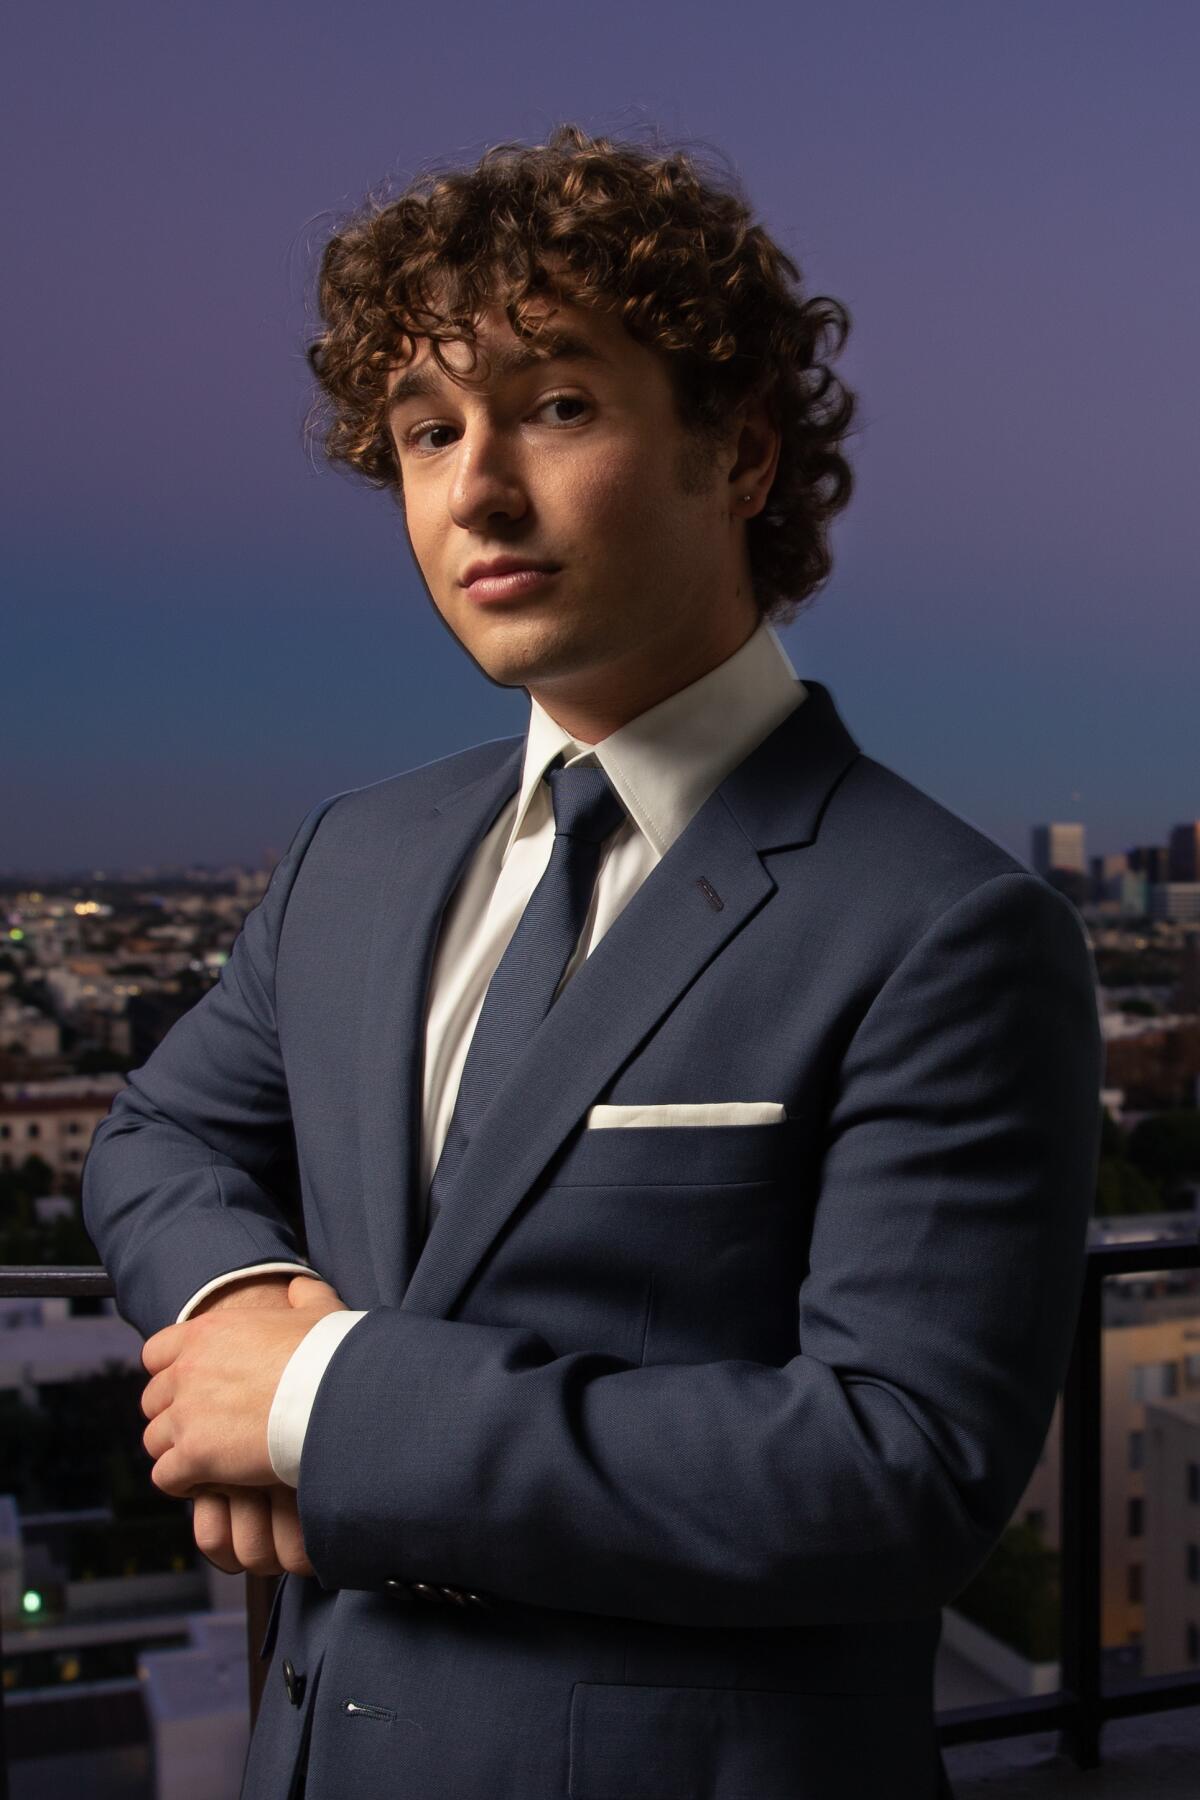 Gabriel LaBelle poses for a portrait wearing a blue suit and standing against a dusky sky.